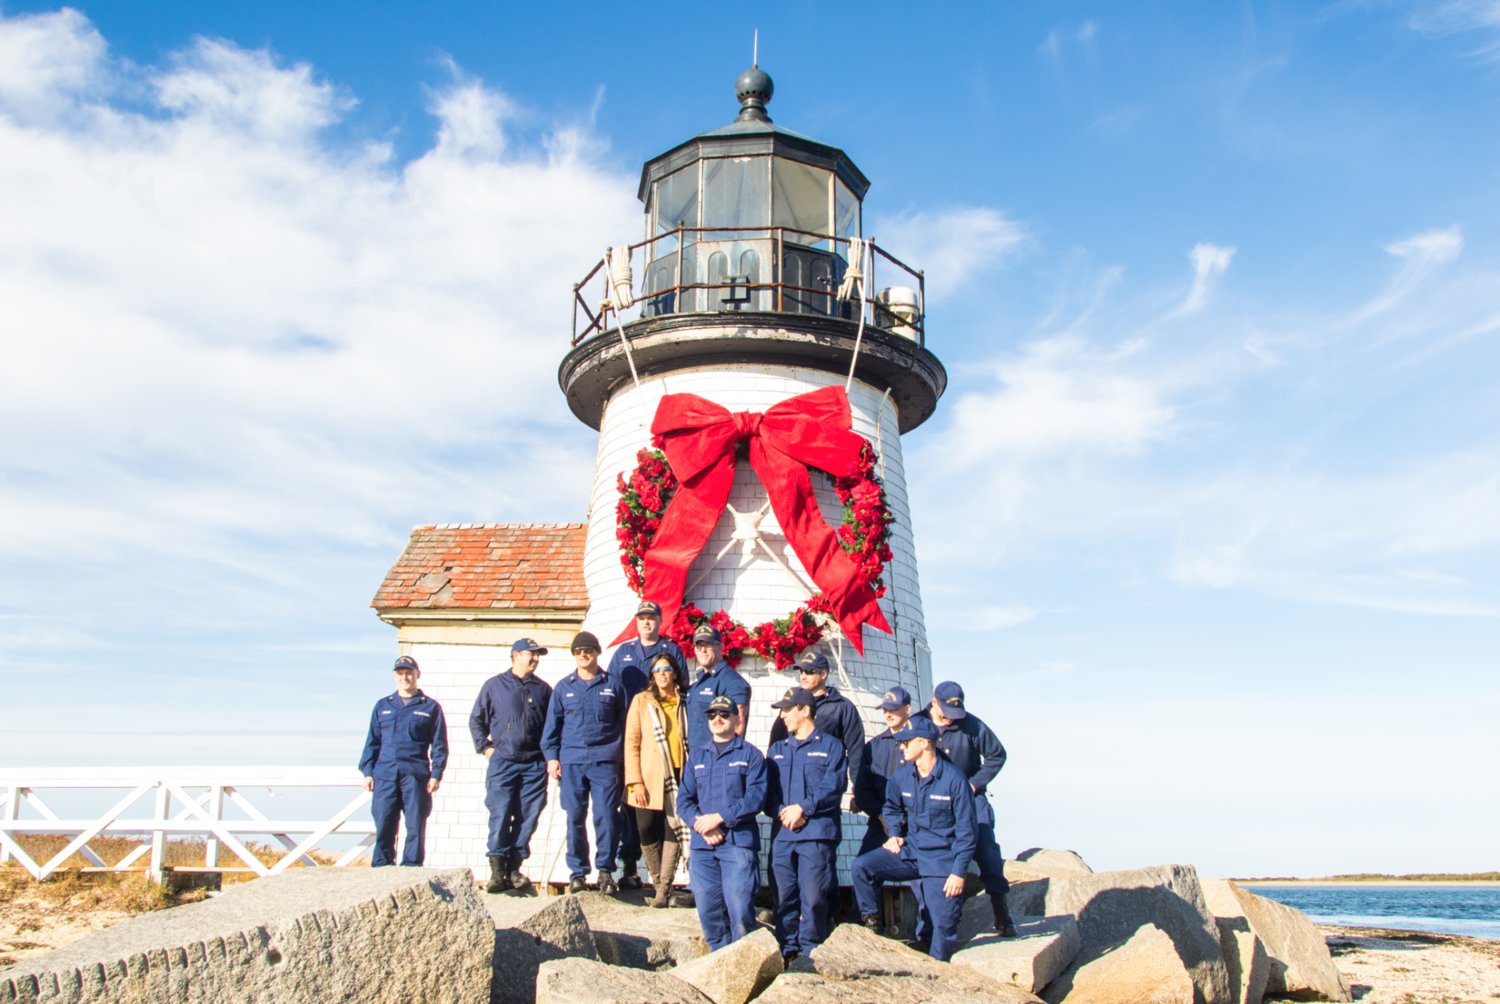 ALL DECKED OUT: The crew from U.S. Coast Guard Station Brant Point stands in front of Brant Point lighthouse after hanging the Christmas wreath – a tradition that goes back years.